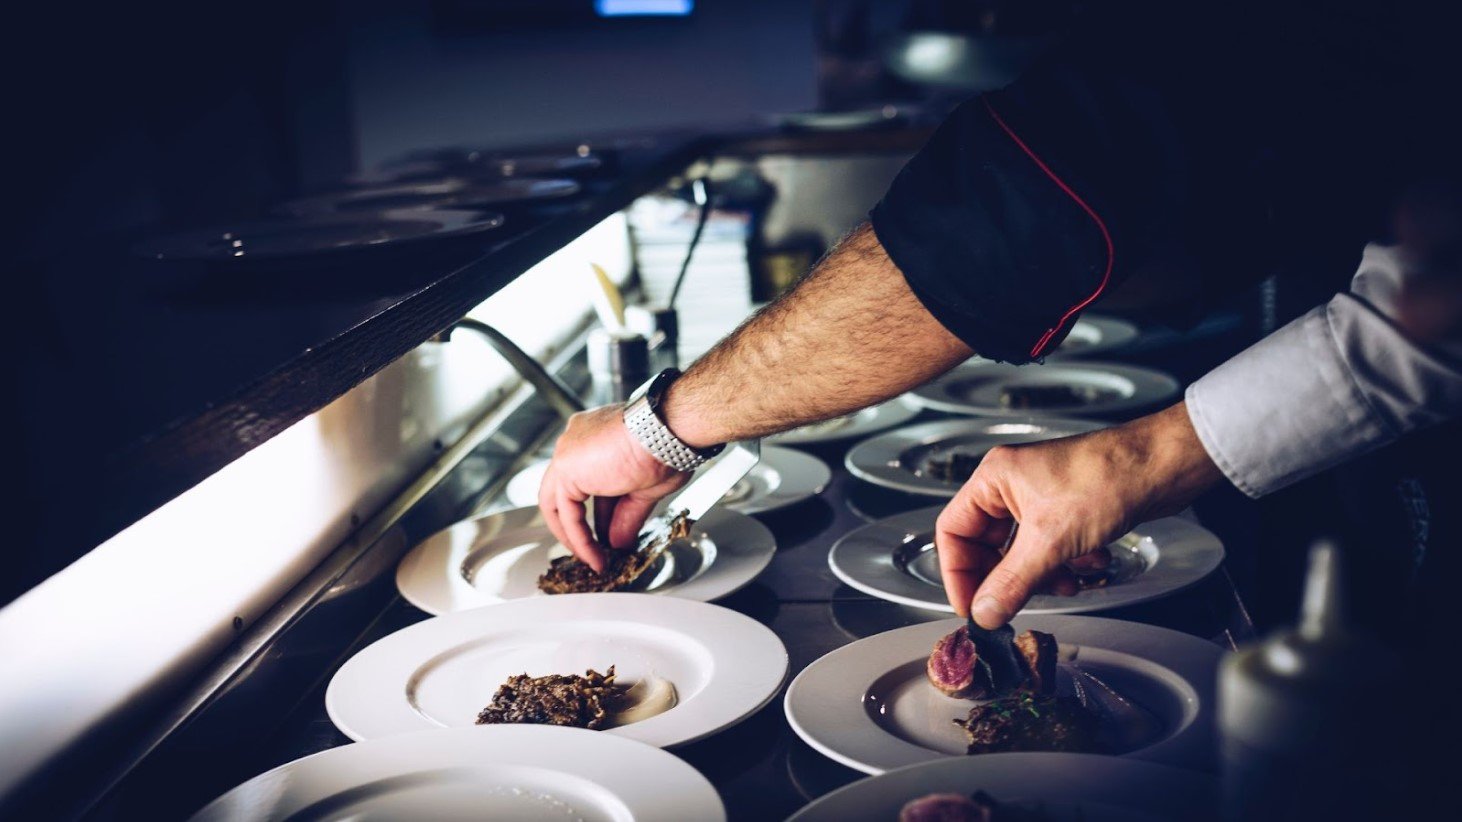 Close-up of a chef's hands meticulously placing food on white plates in a dimly lit kitchen